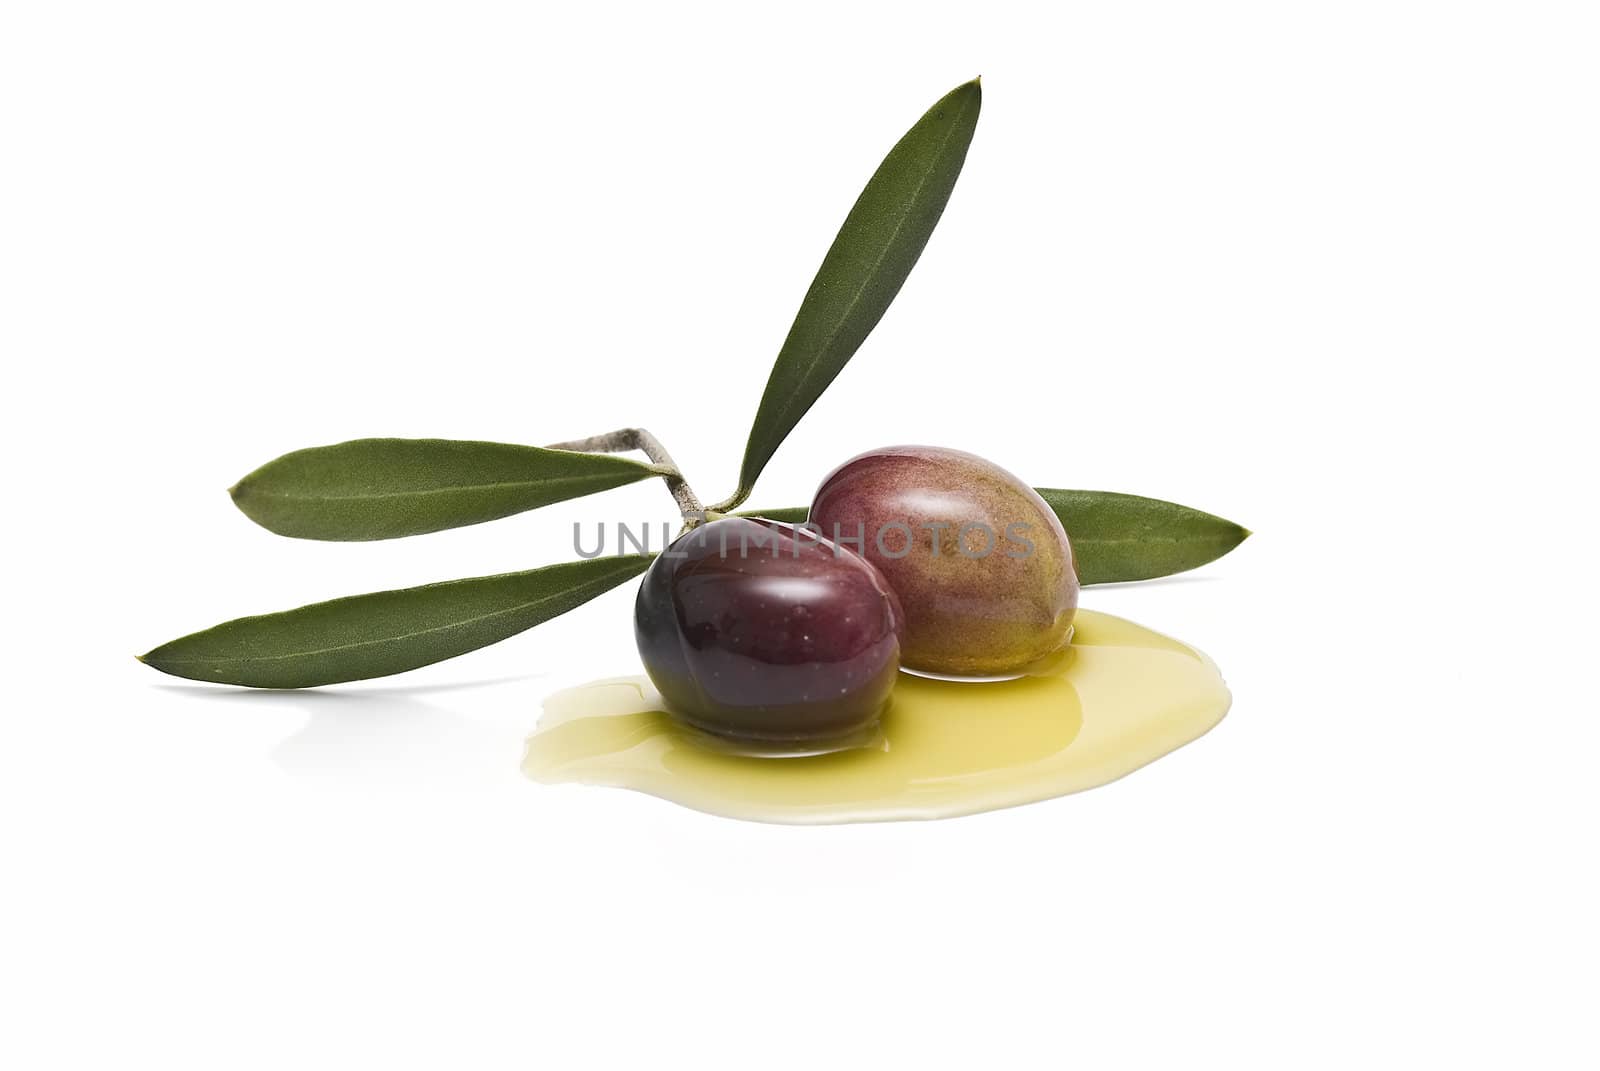 A branch with two olives on some oil.